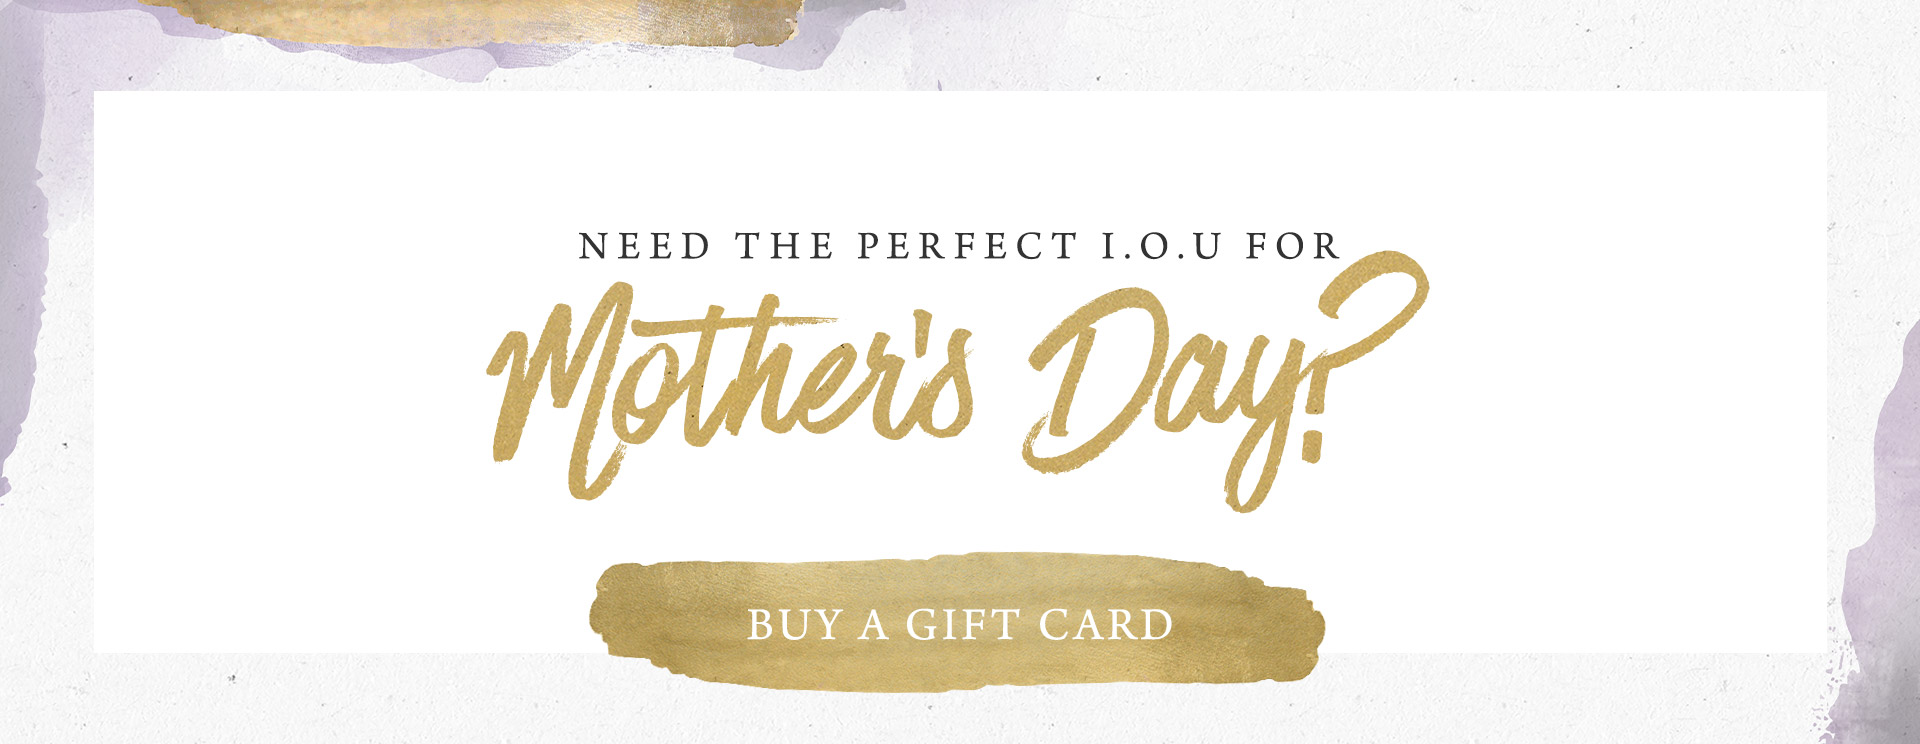 Mother's Day 2019 at The Lyttelton Arms